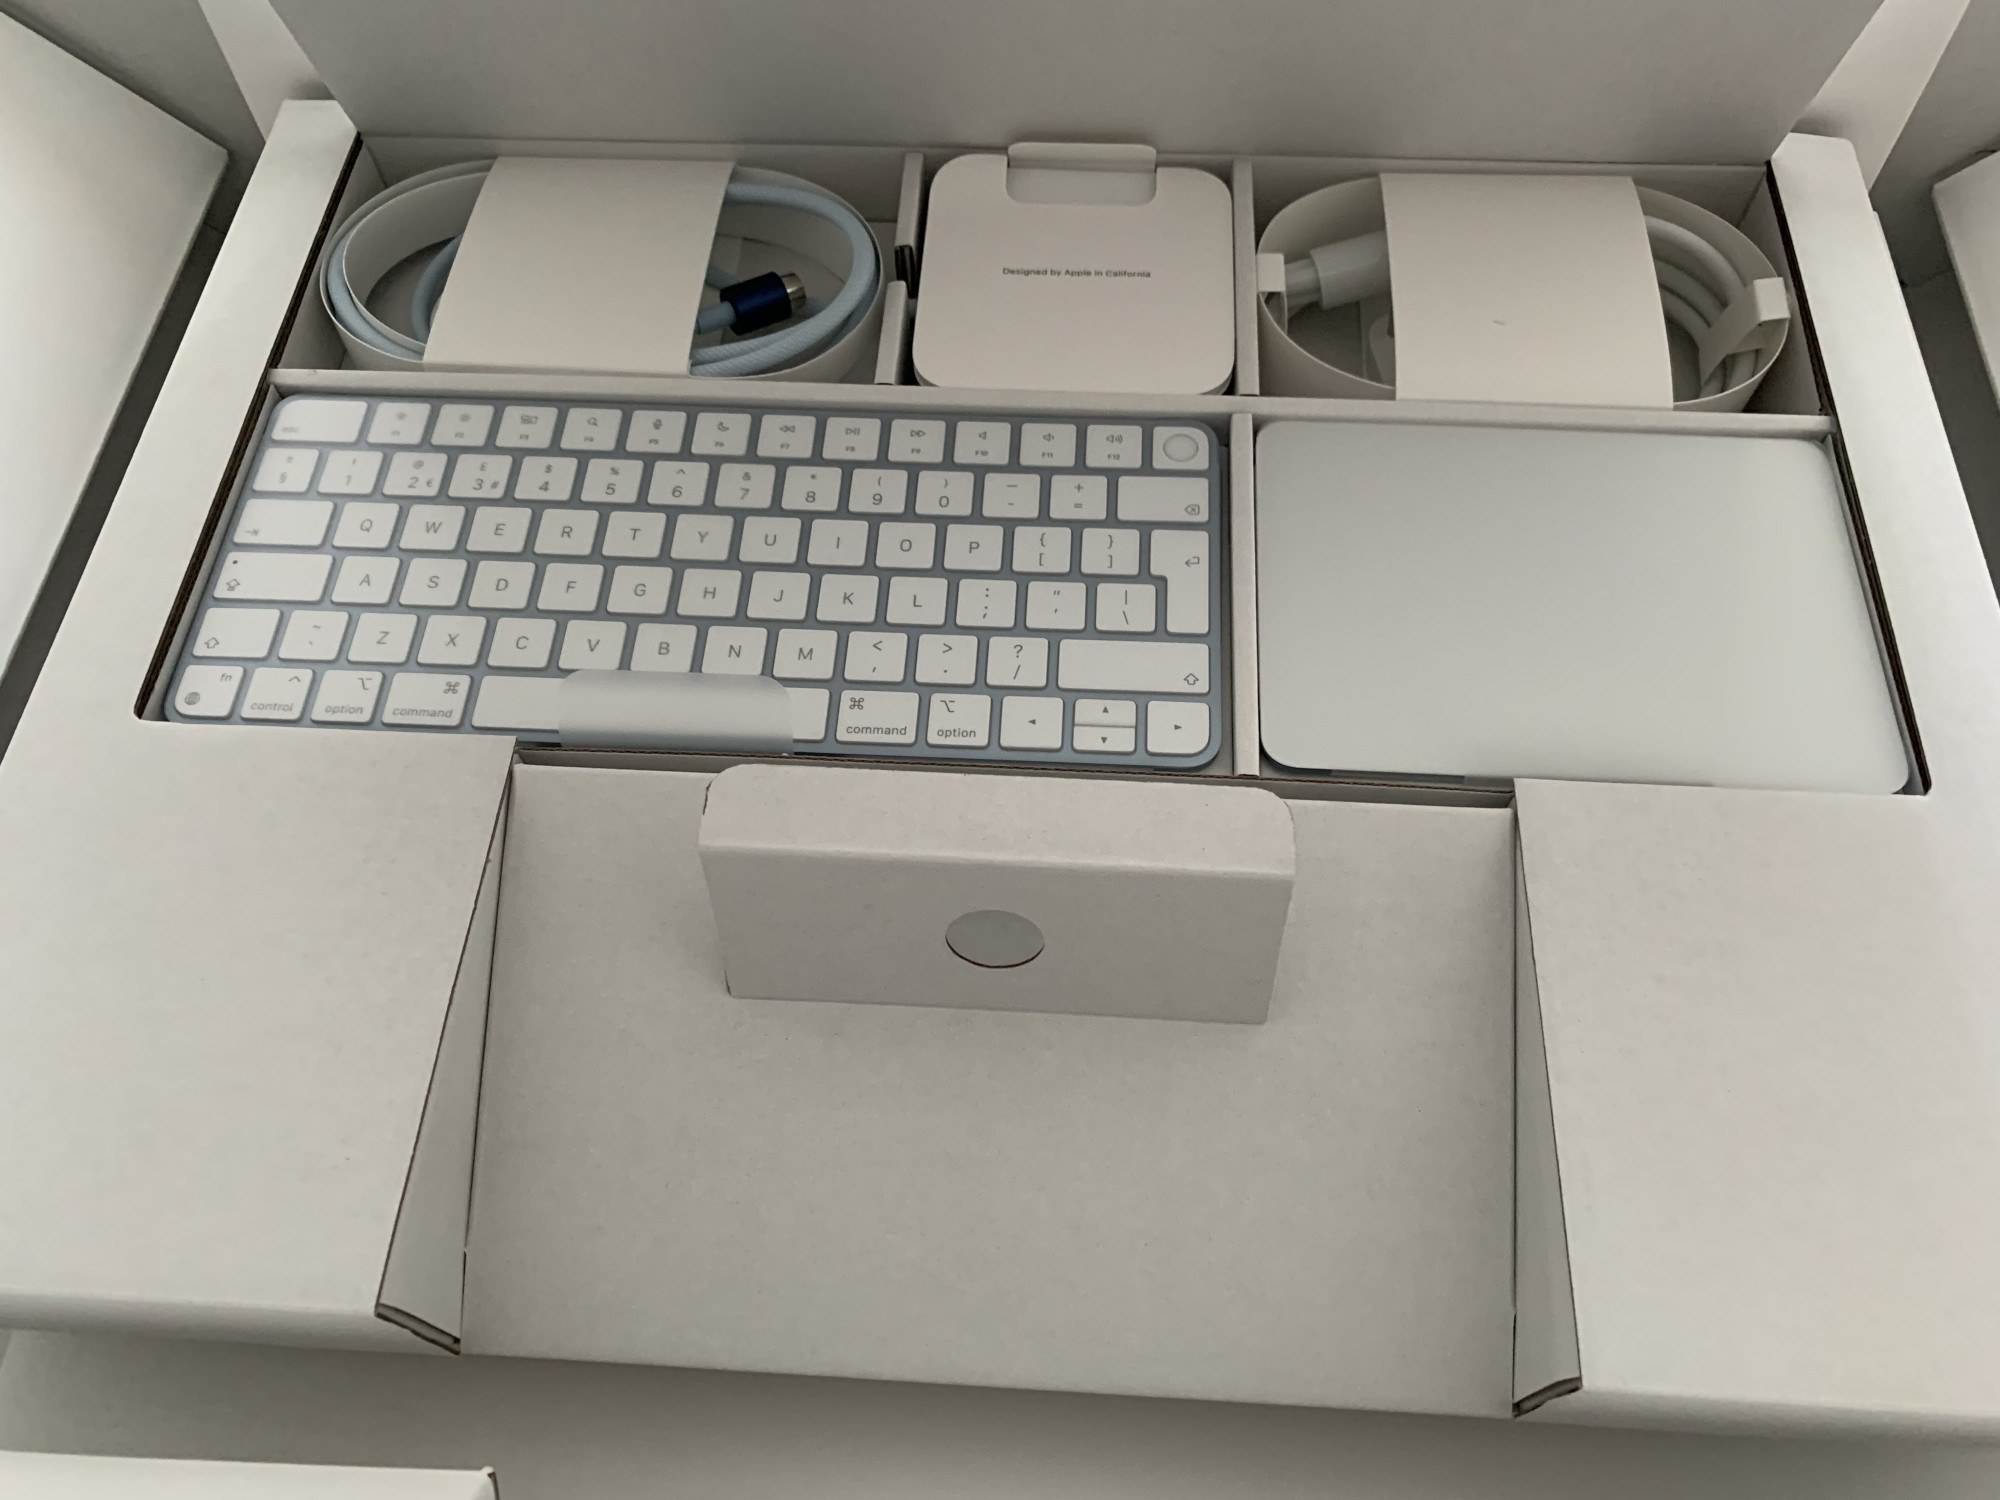 iMac Packaging, Keyboard and Mouse